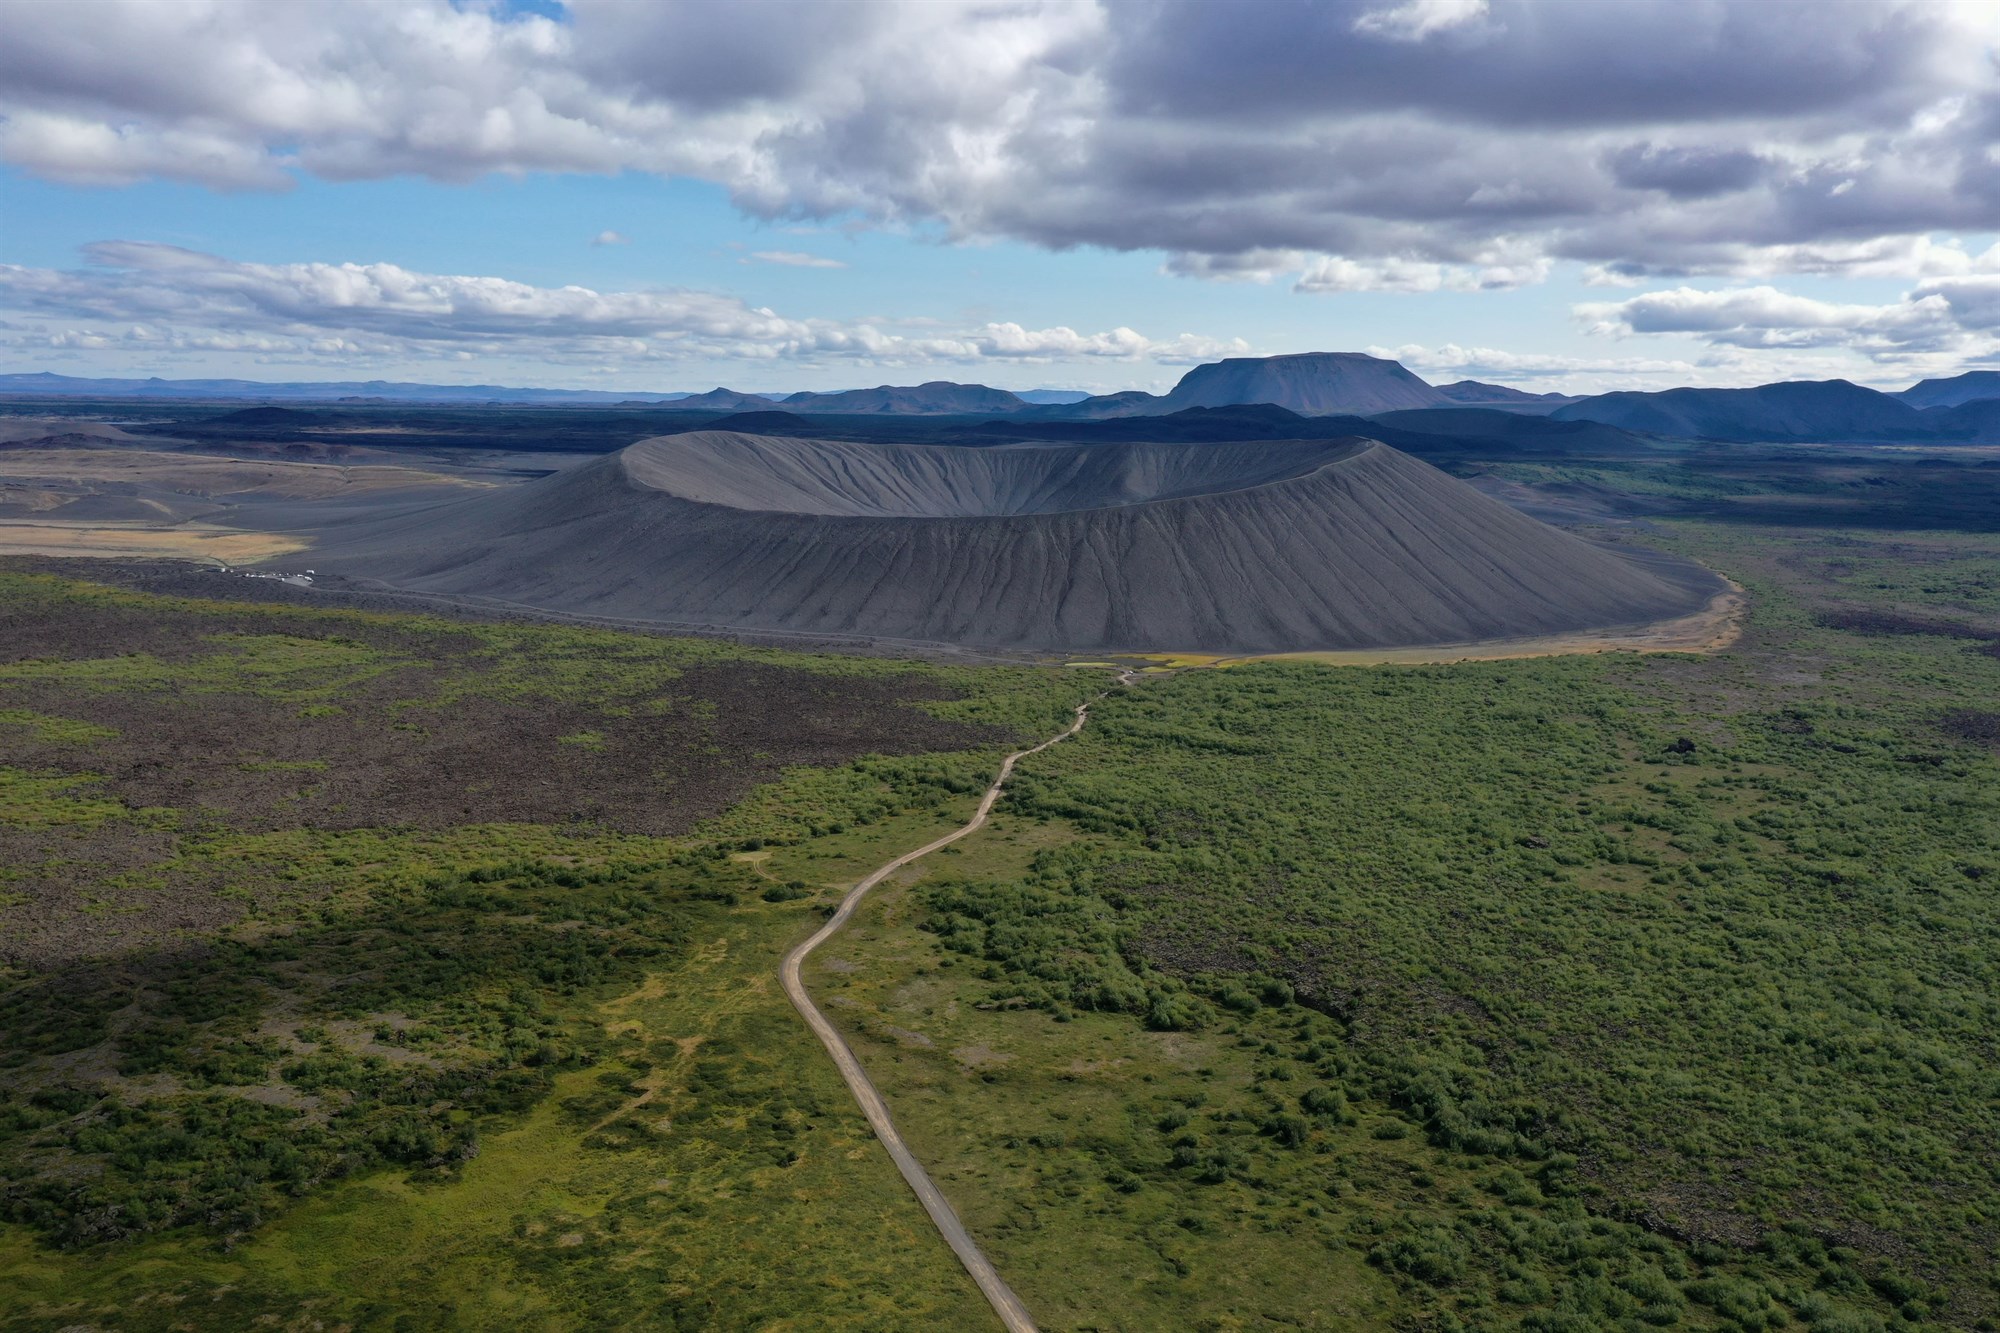 Aerial shot of the Hverfjall volcano crater in Iceland